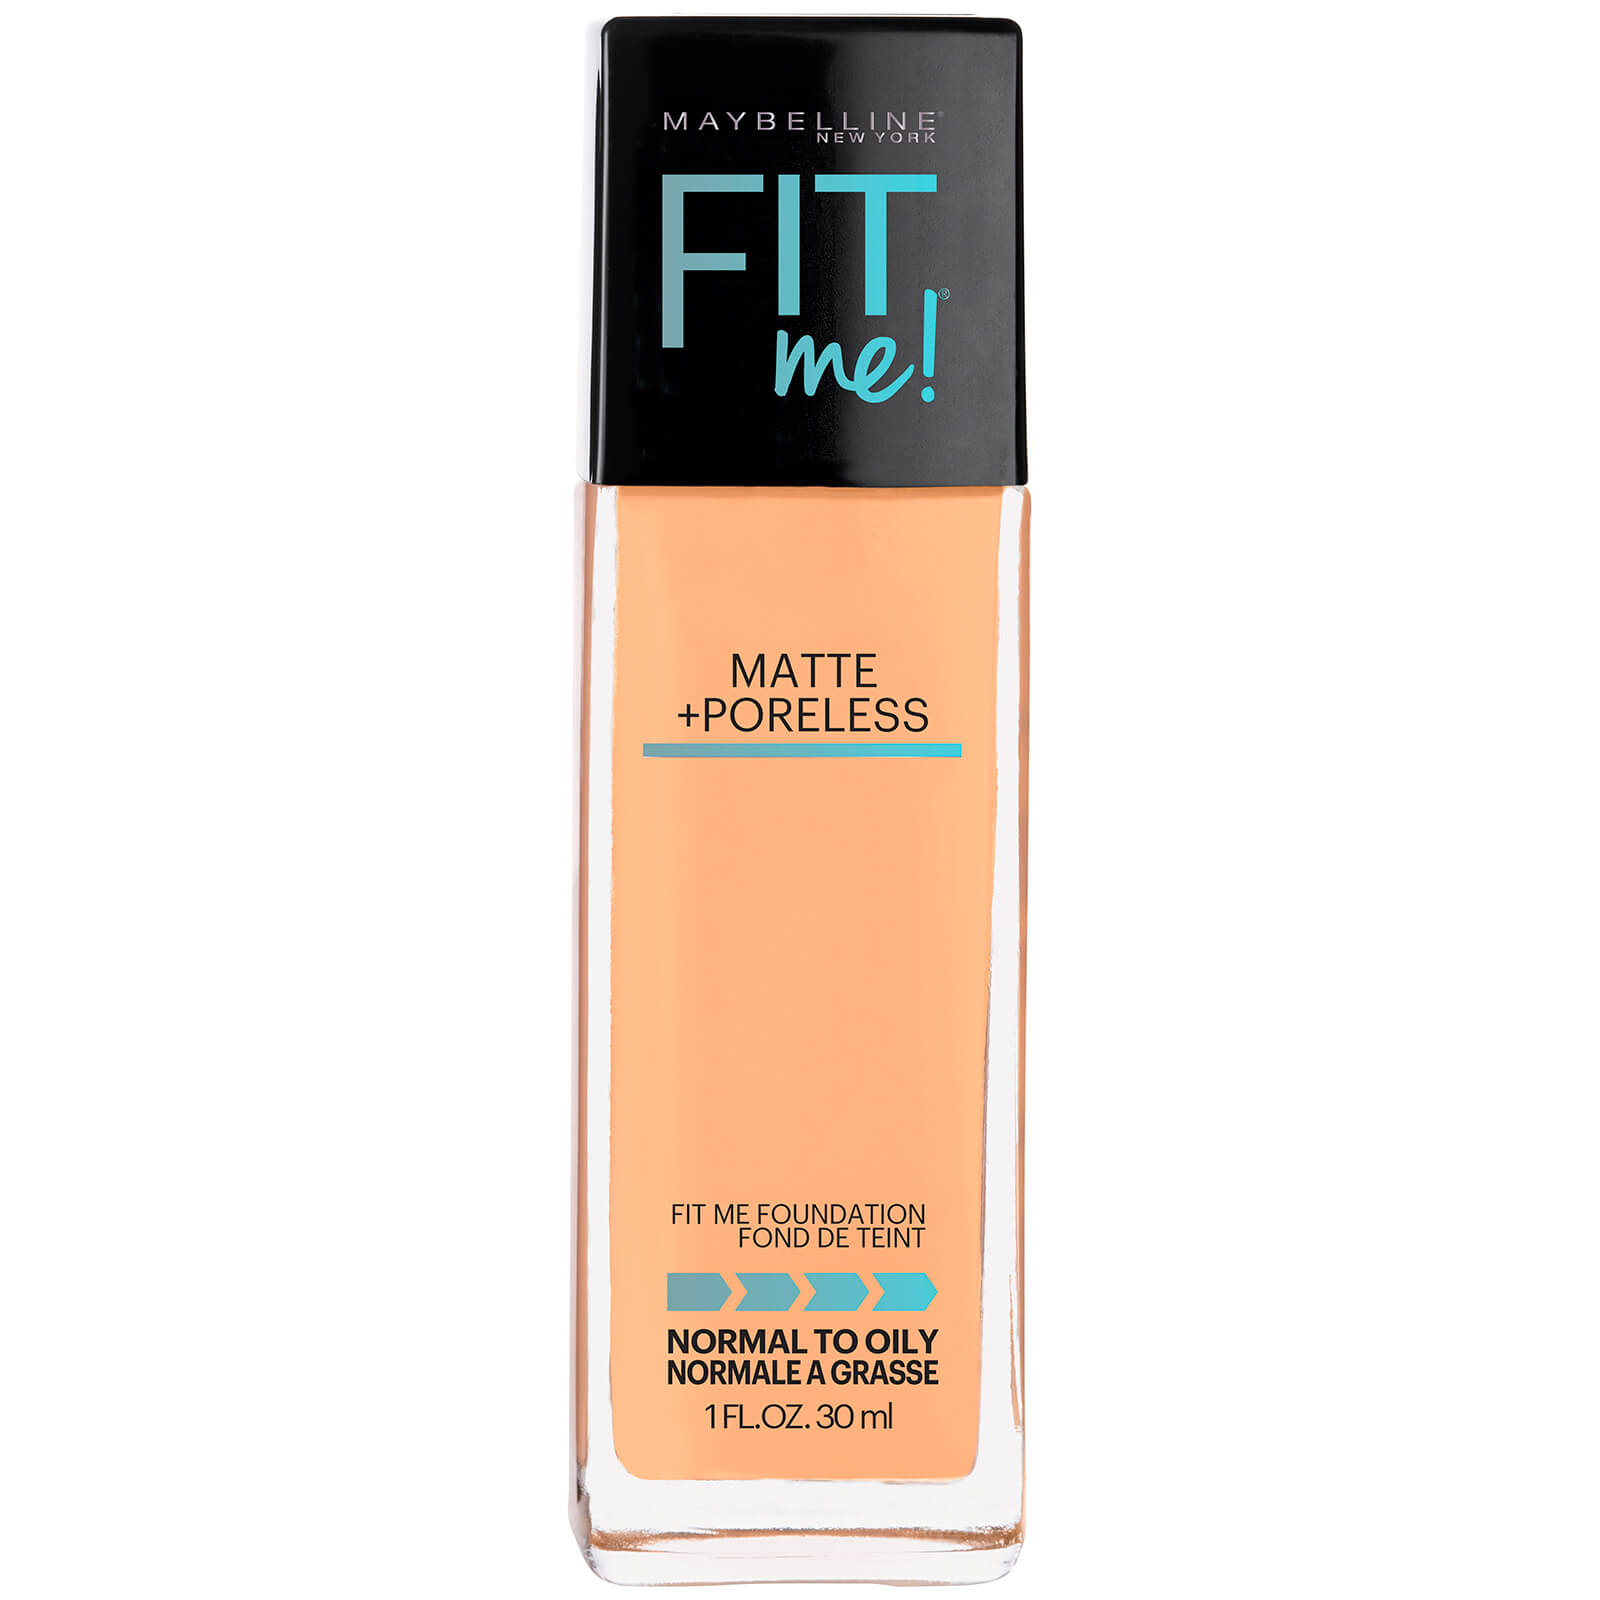 Maybelline Fit Me! Matte and Poreless Mattifying Liquid Foundation 30ml (Various Shades) - 230 Natural Buff